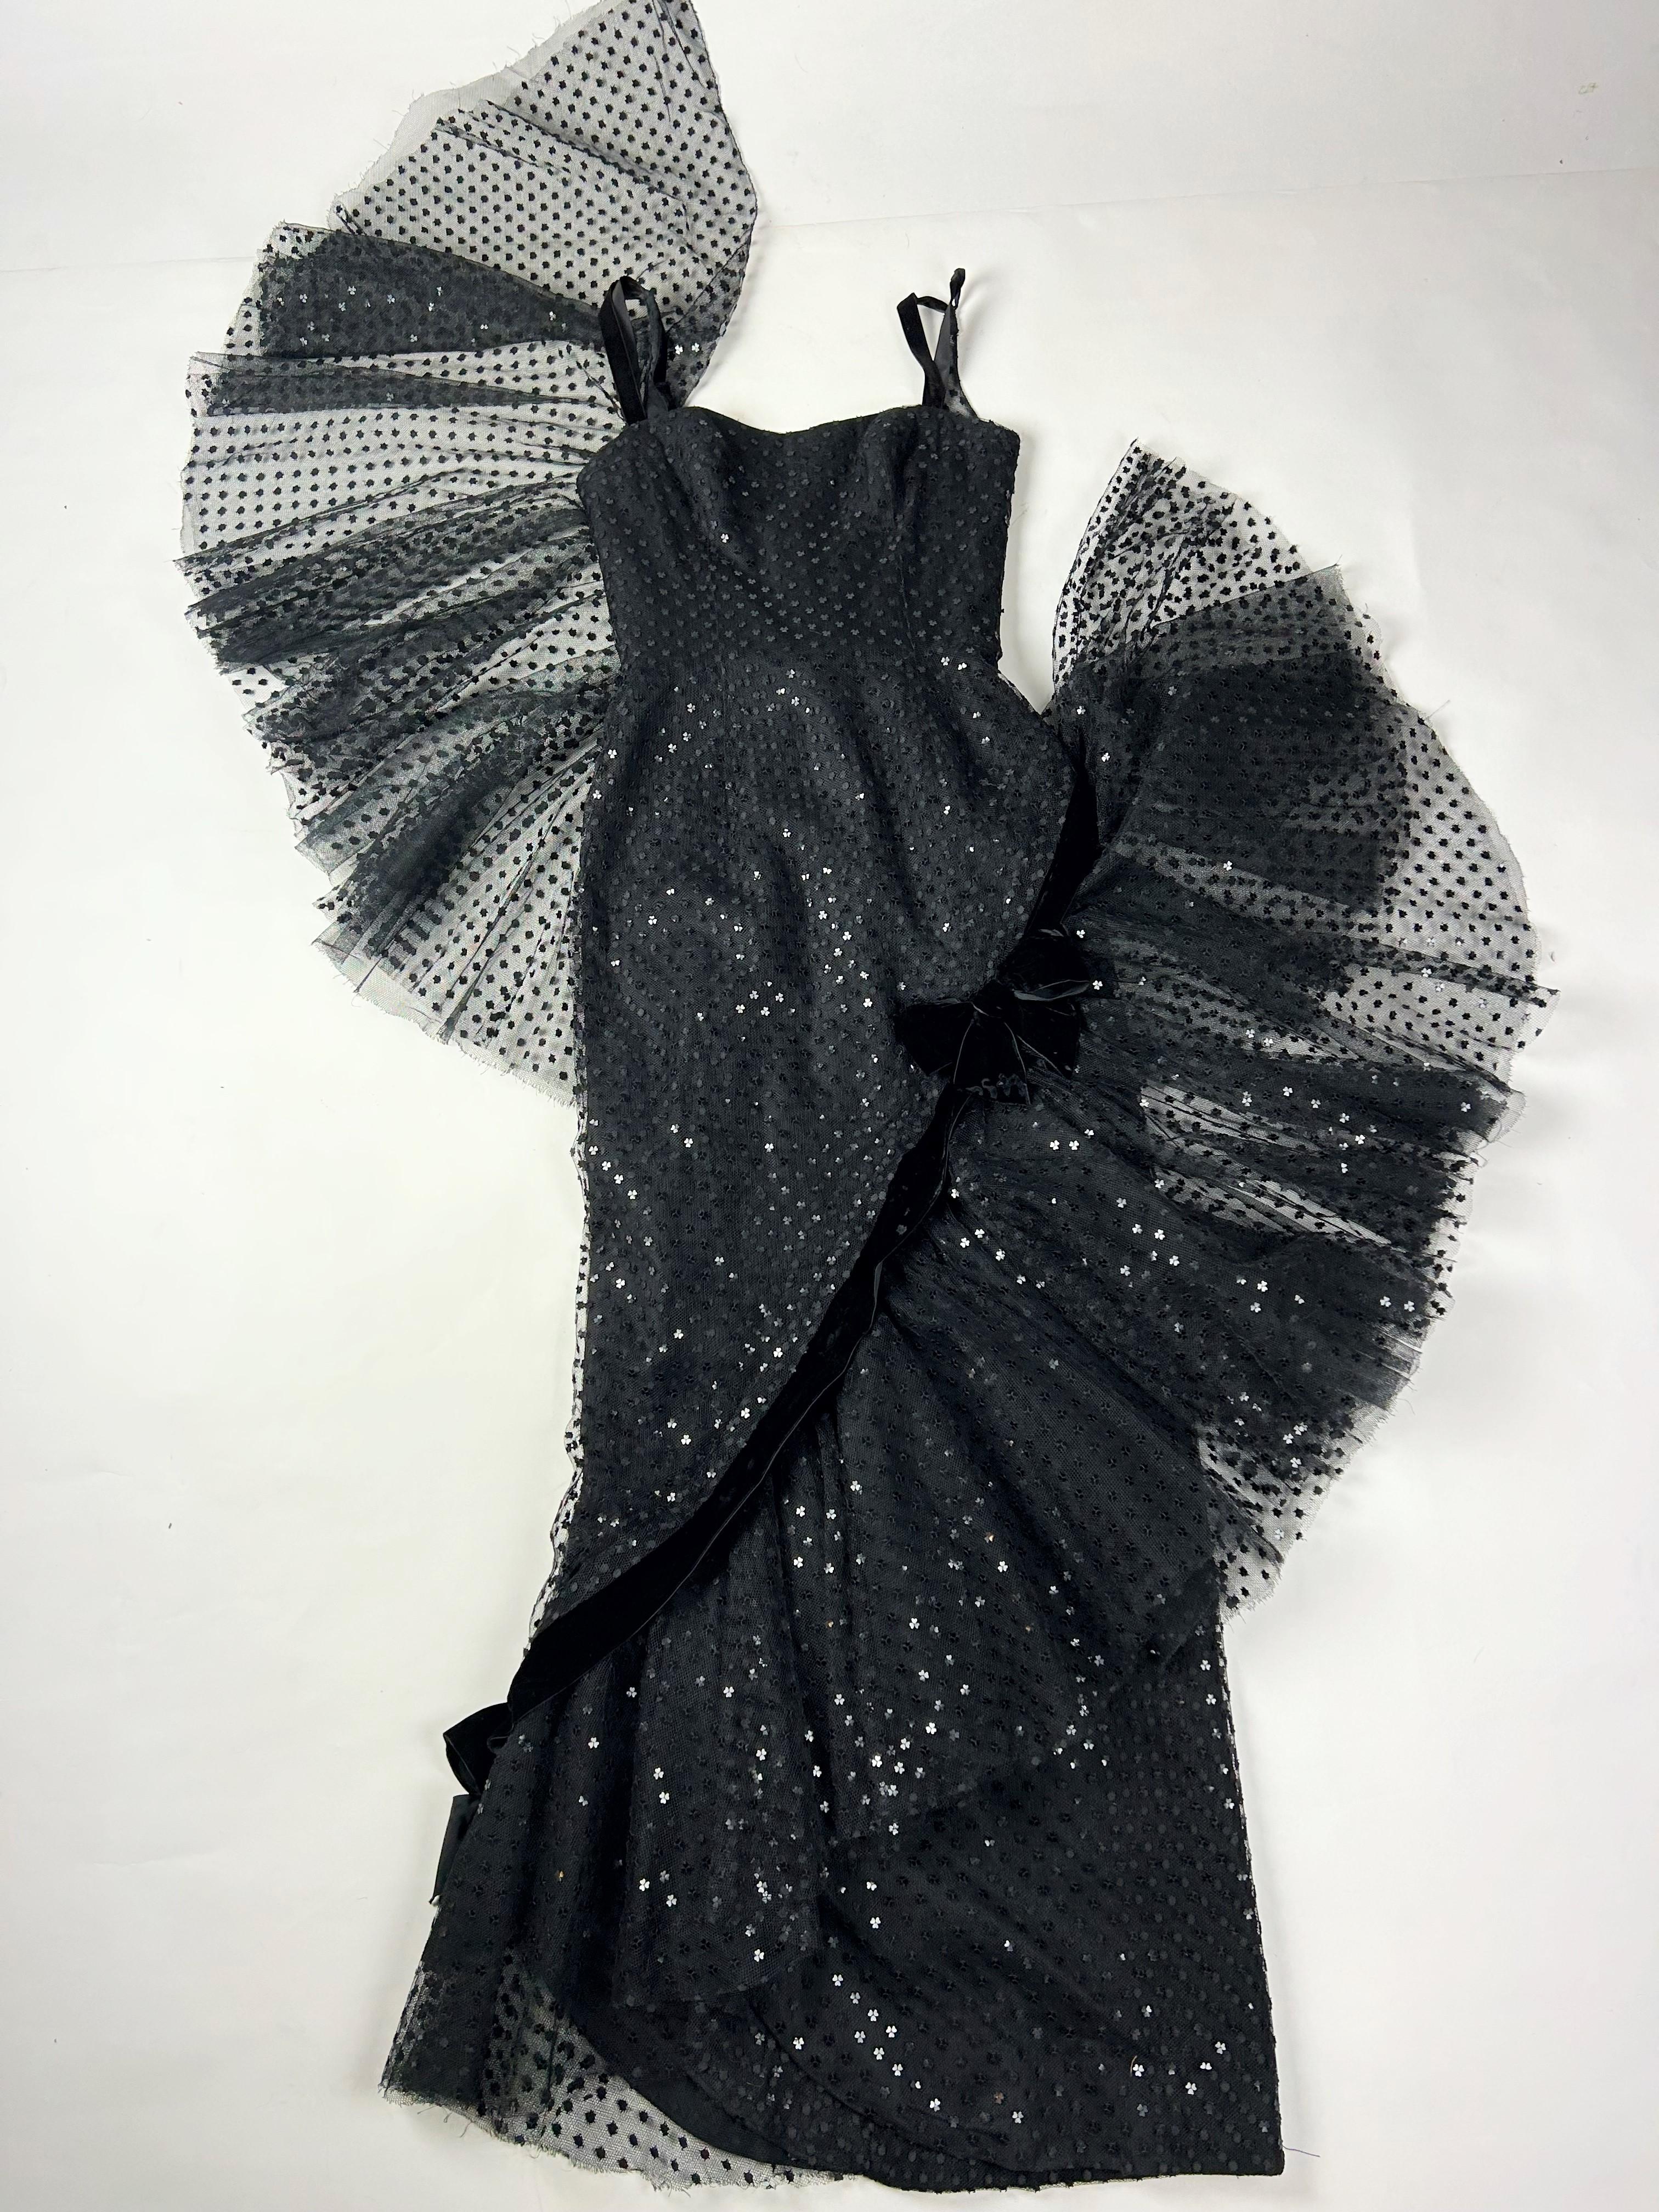 Circa 1958-1963

France

Spectacular black tulle evening gown embroidered with heart-shaped sequins by Jean Dessès Haute Couture and dating from the early 1960s. Sleeveless, tight-fitting and sheath-like dress emphasizing the silhouette. Large